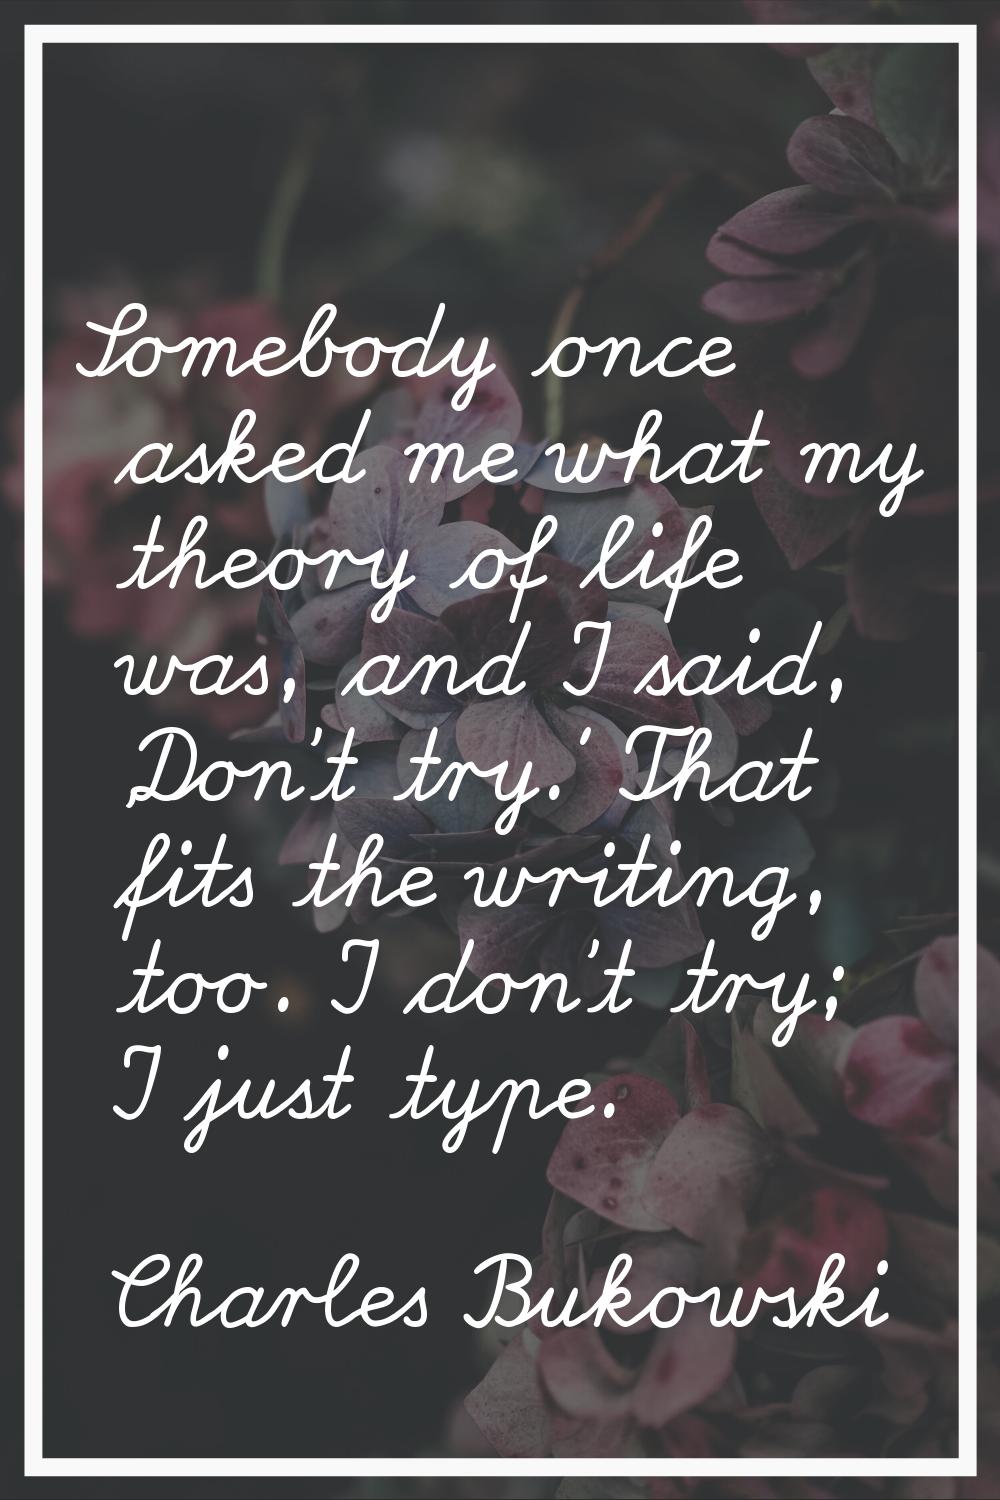 Somebody once asked me what my theory of life was, and I said, 'Don't try.' That fits the writing, 